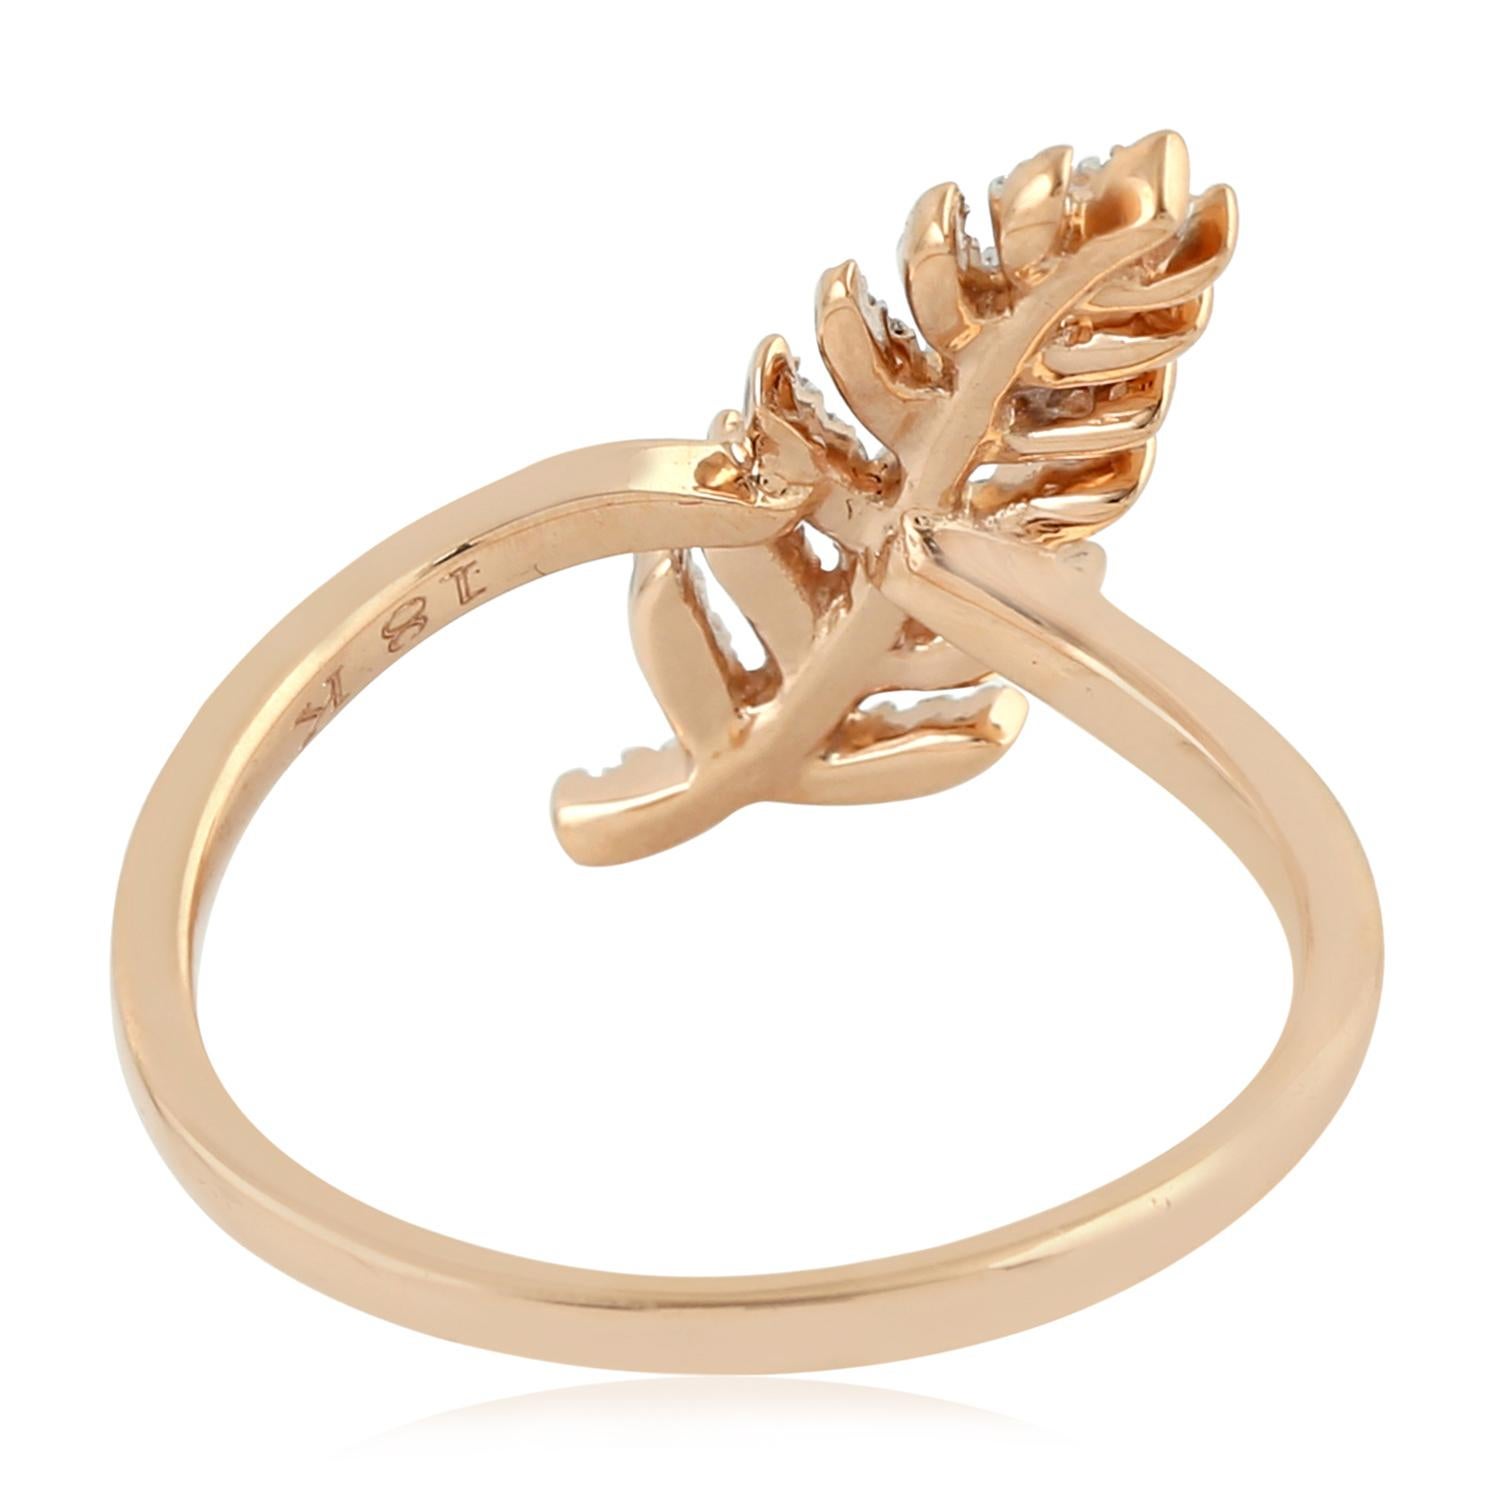 14 Karat Rose Gold 0.23 Carat Diamond Pave Ring Leaf Design Jewelry US Size 7

0.23 carats of White Round brilliant-cut diamonds Pave set on 14k Rose Gold Leaf Design.
Approximately   mm wide
Set in 14k Rose gold.
The finger size is currently 7, it